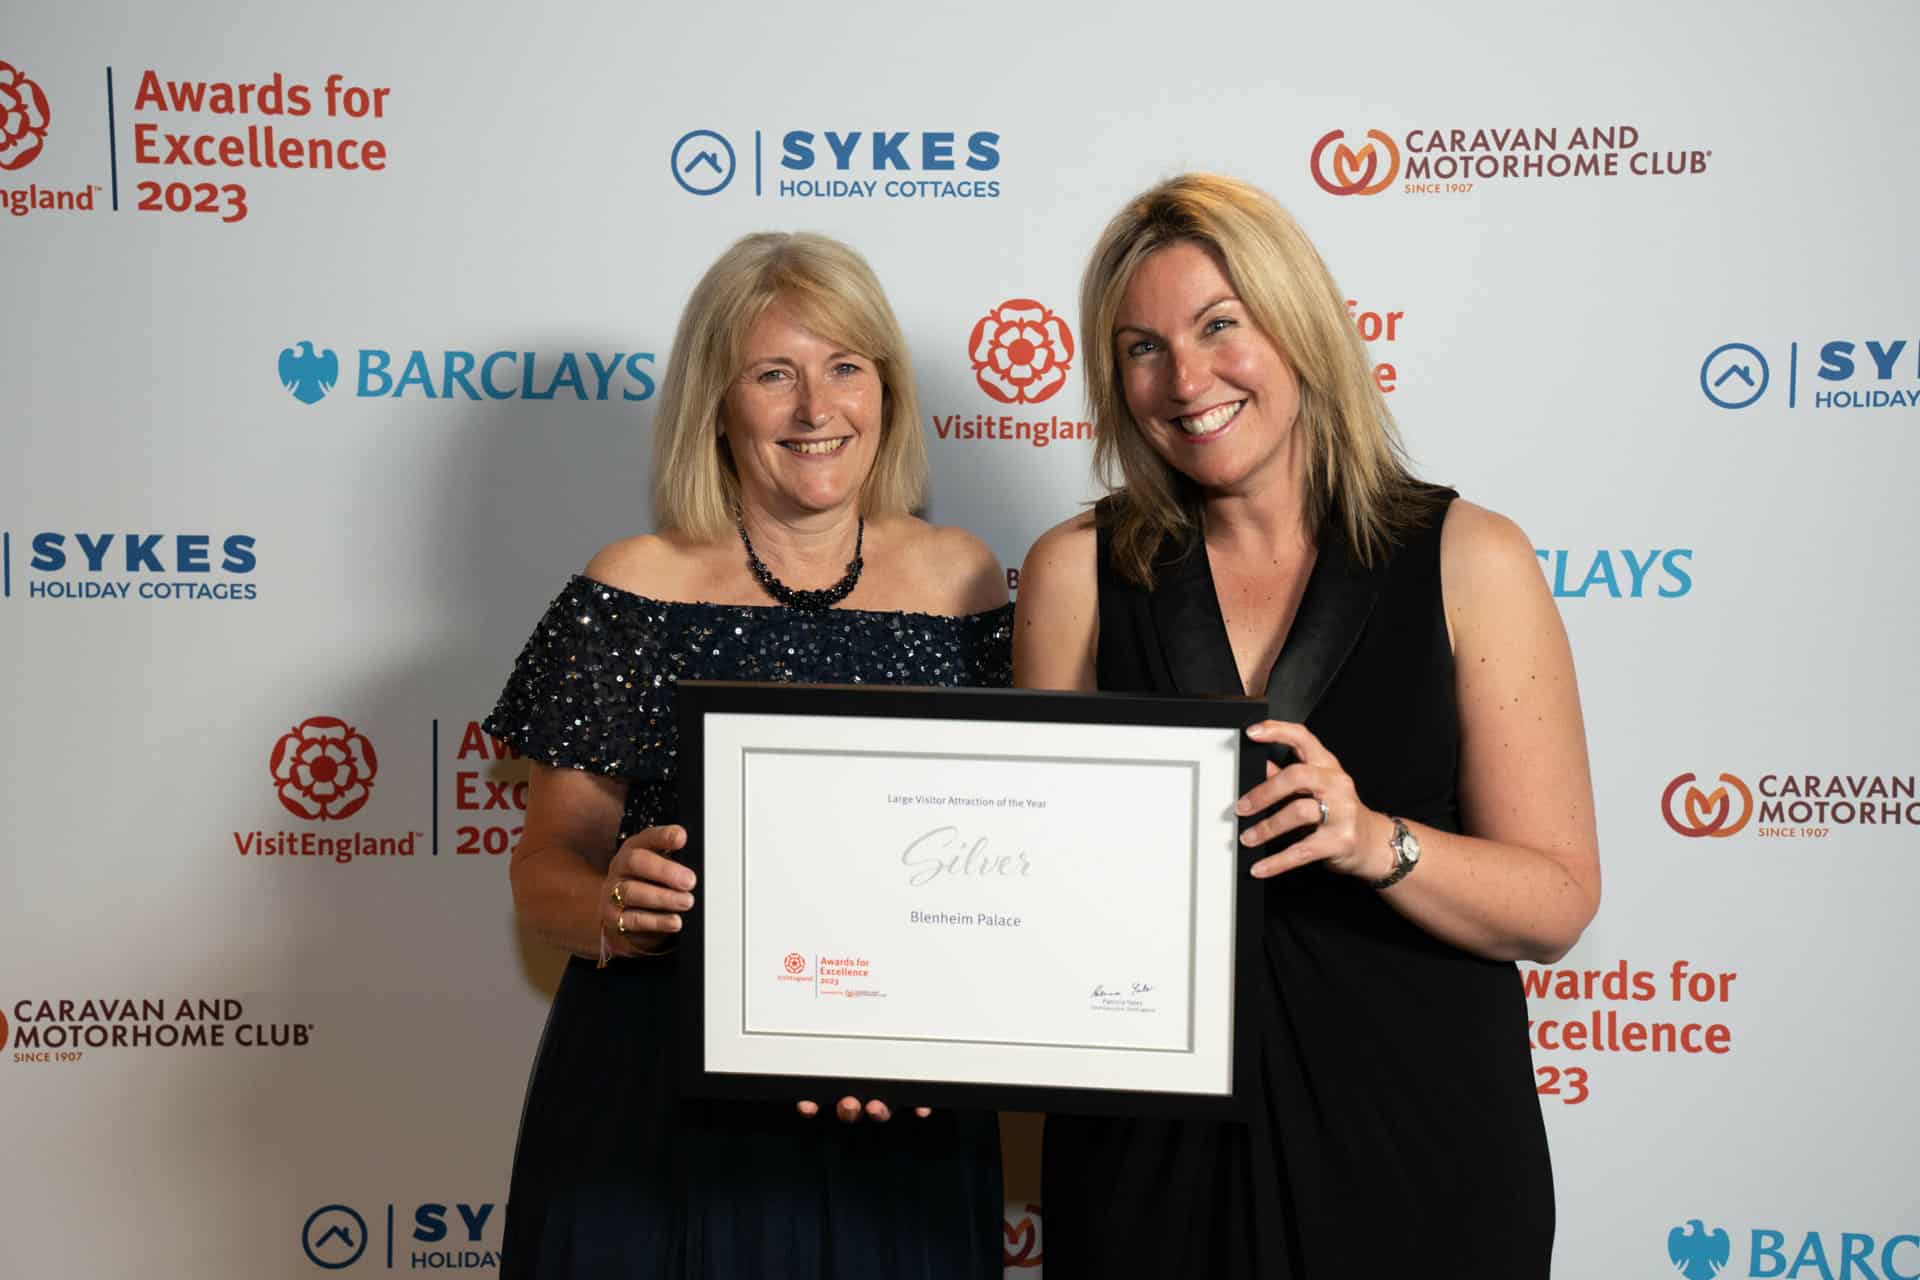 photo of the silver award winners for large visitor attraction of the year at the visitengland awards for excellence 2023 blenheim palace (representatives from blenheim palace) in front of branded photo backdrop